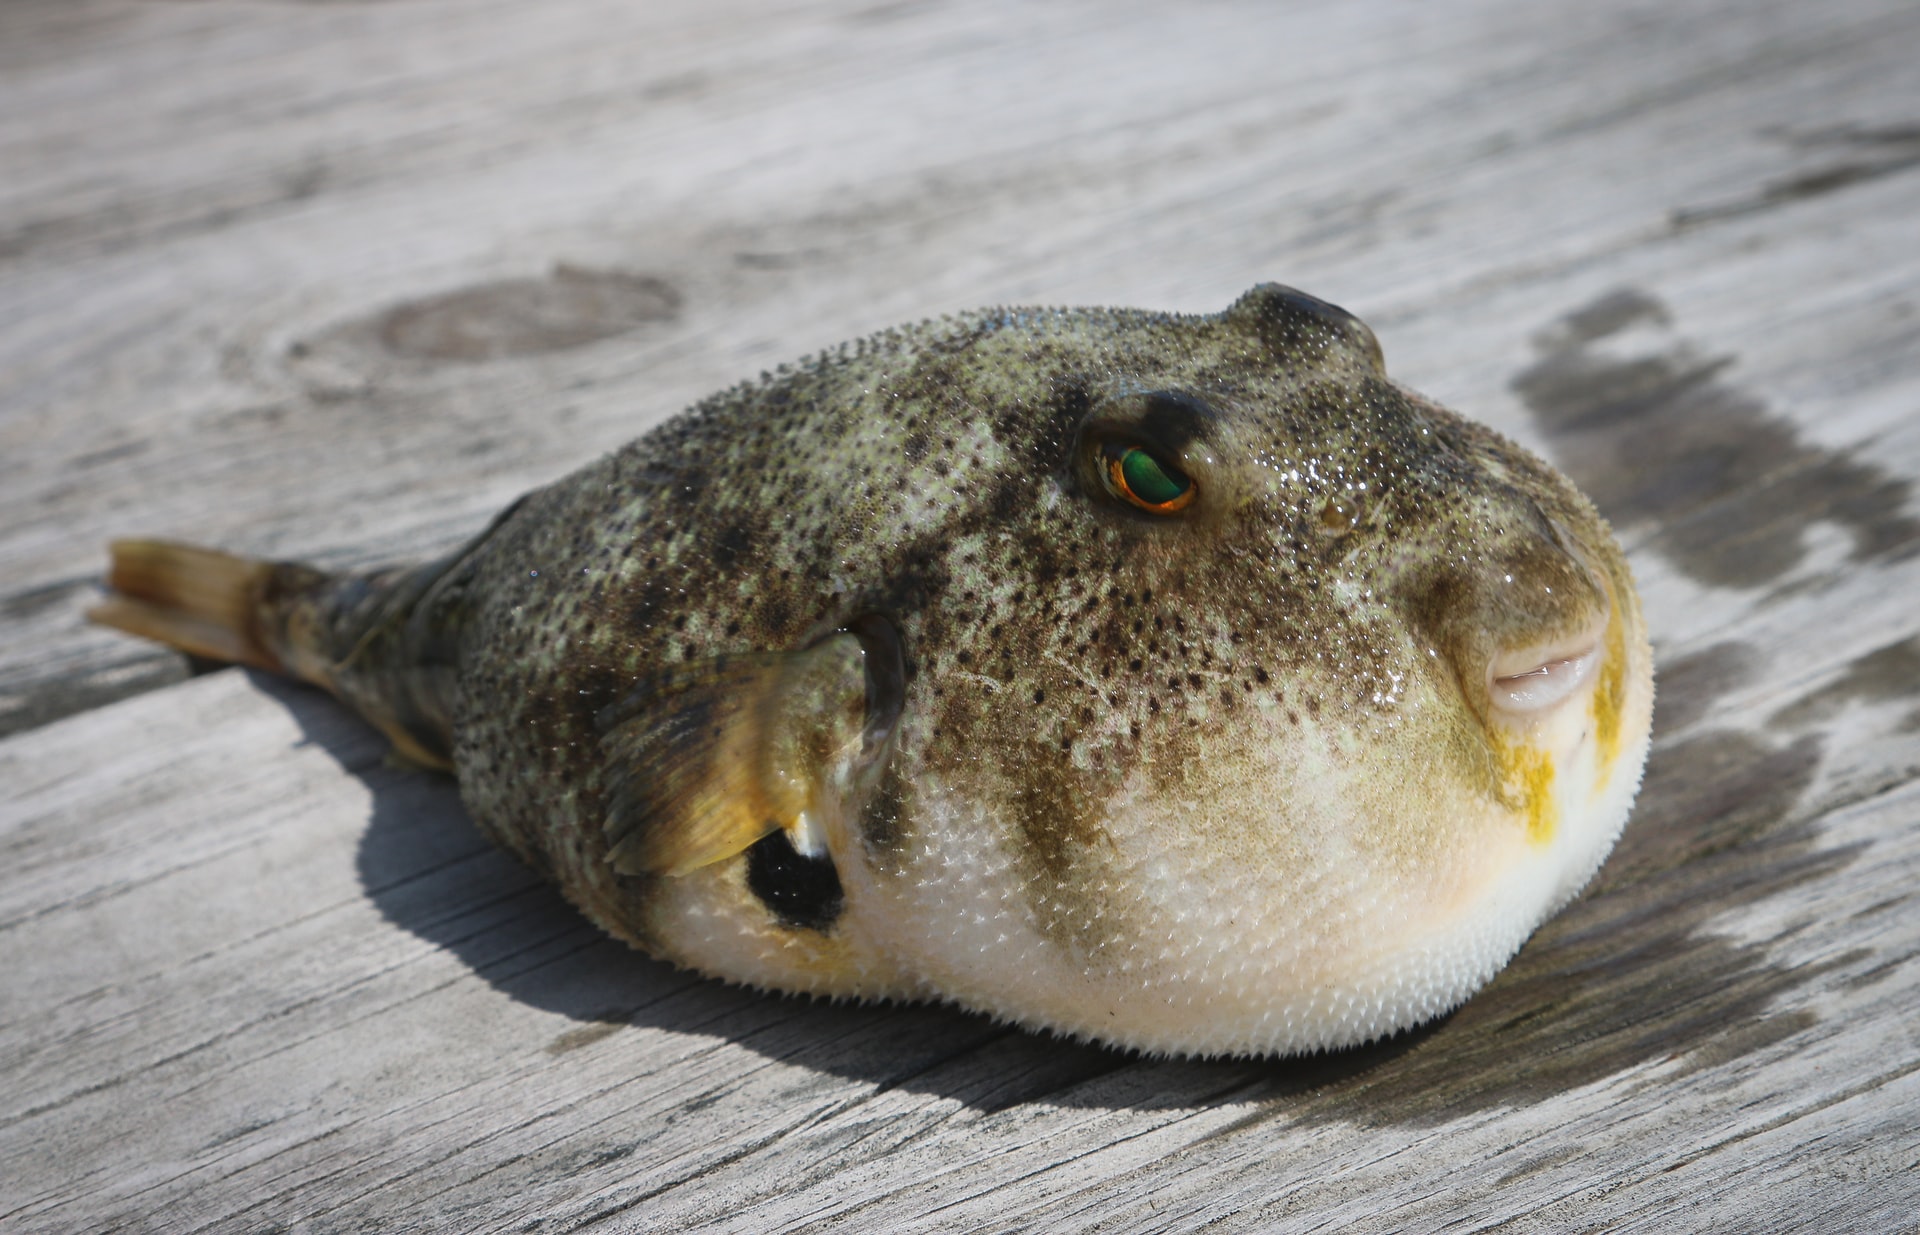 Fugu Fish: The poisonous Japanese Puffer Fish you can buy online